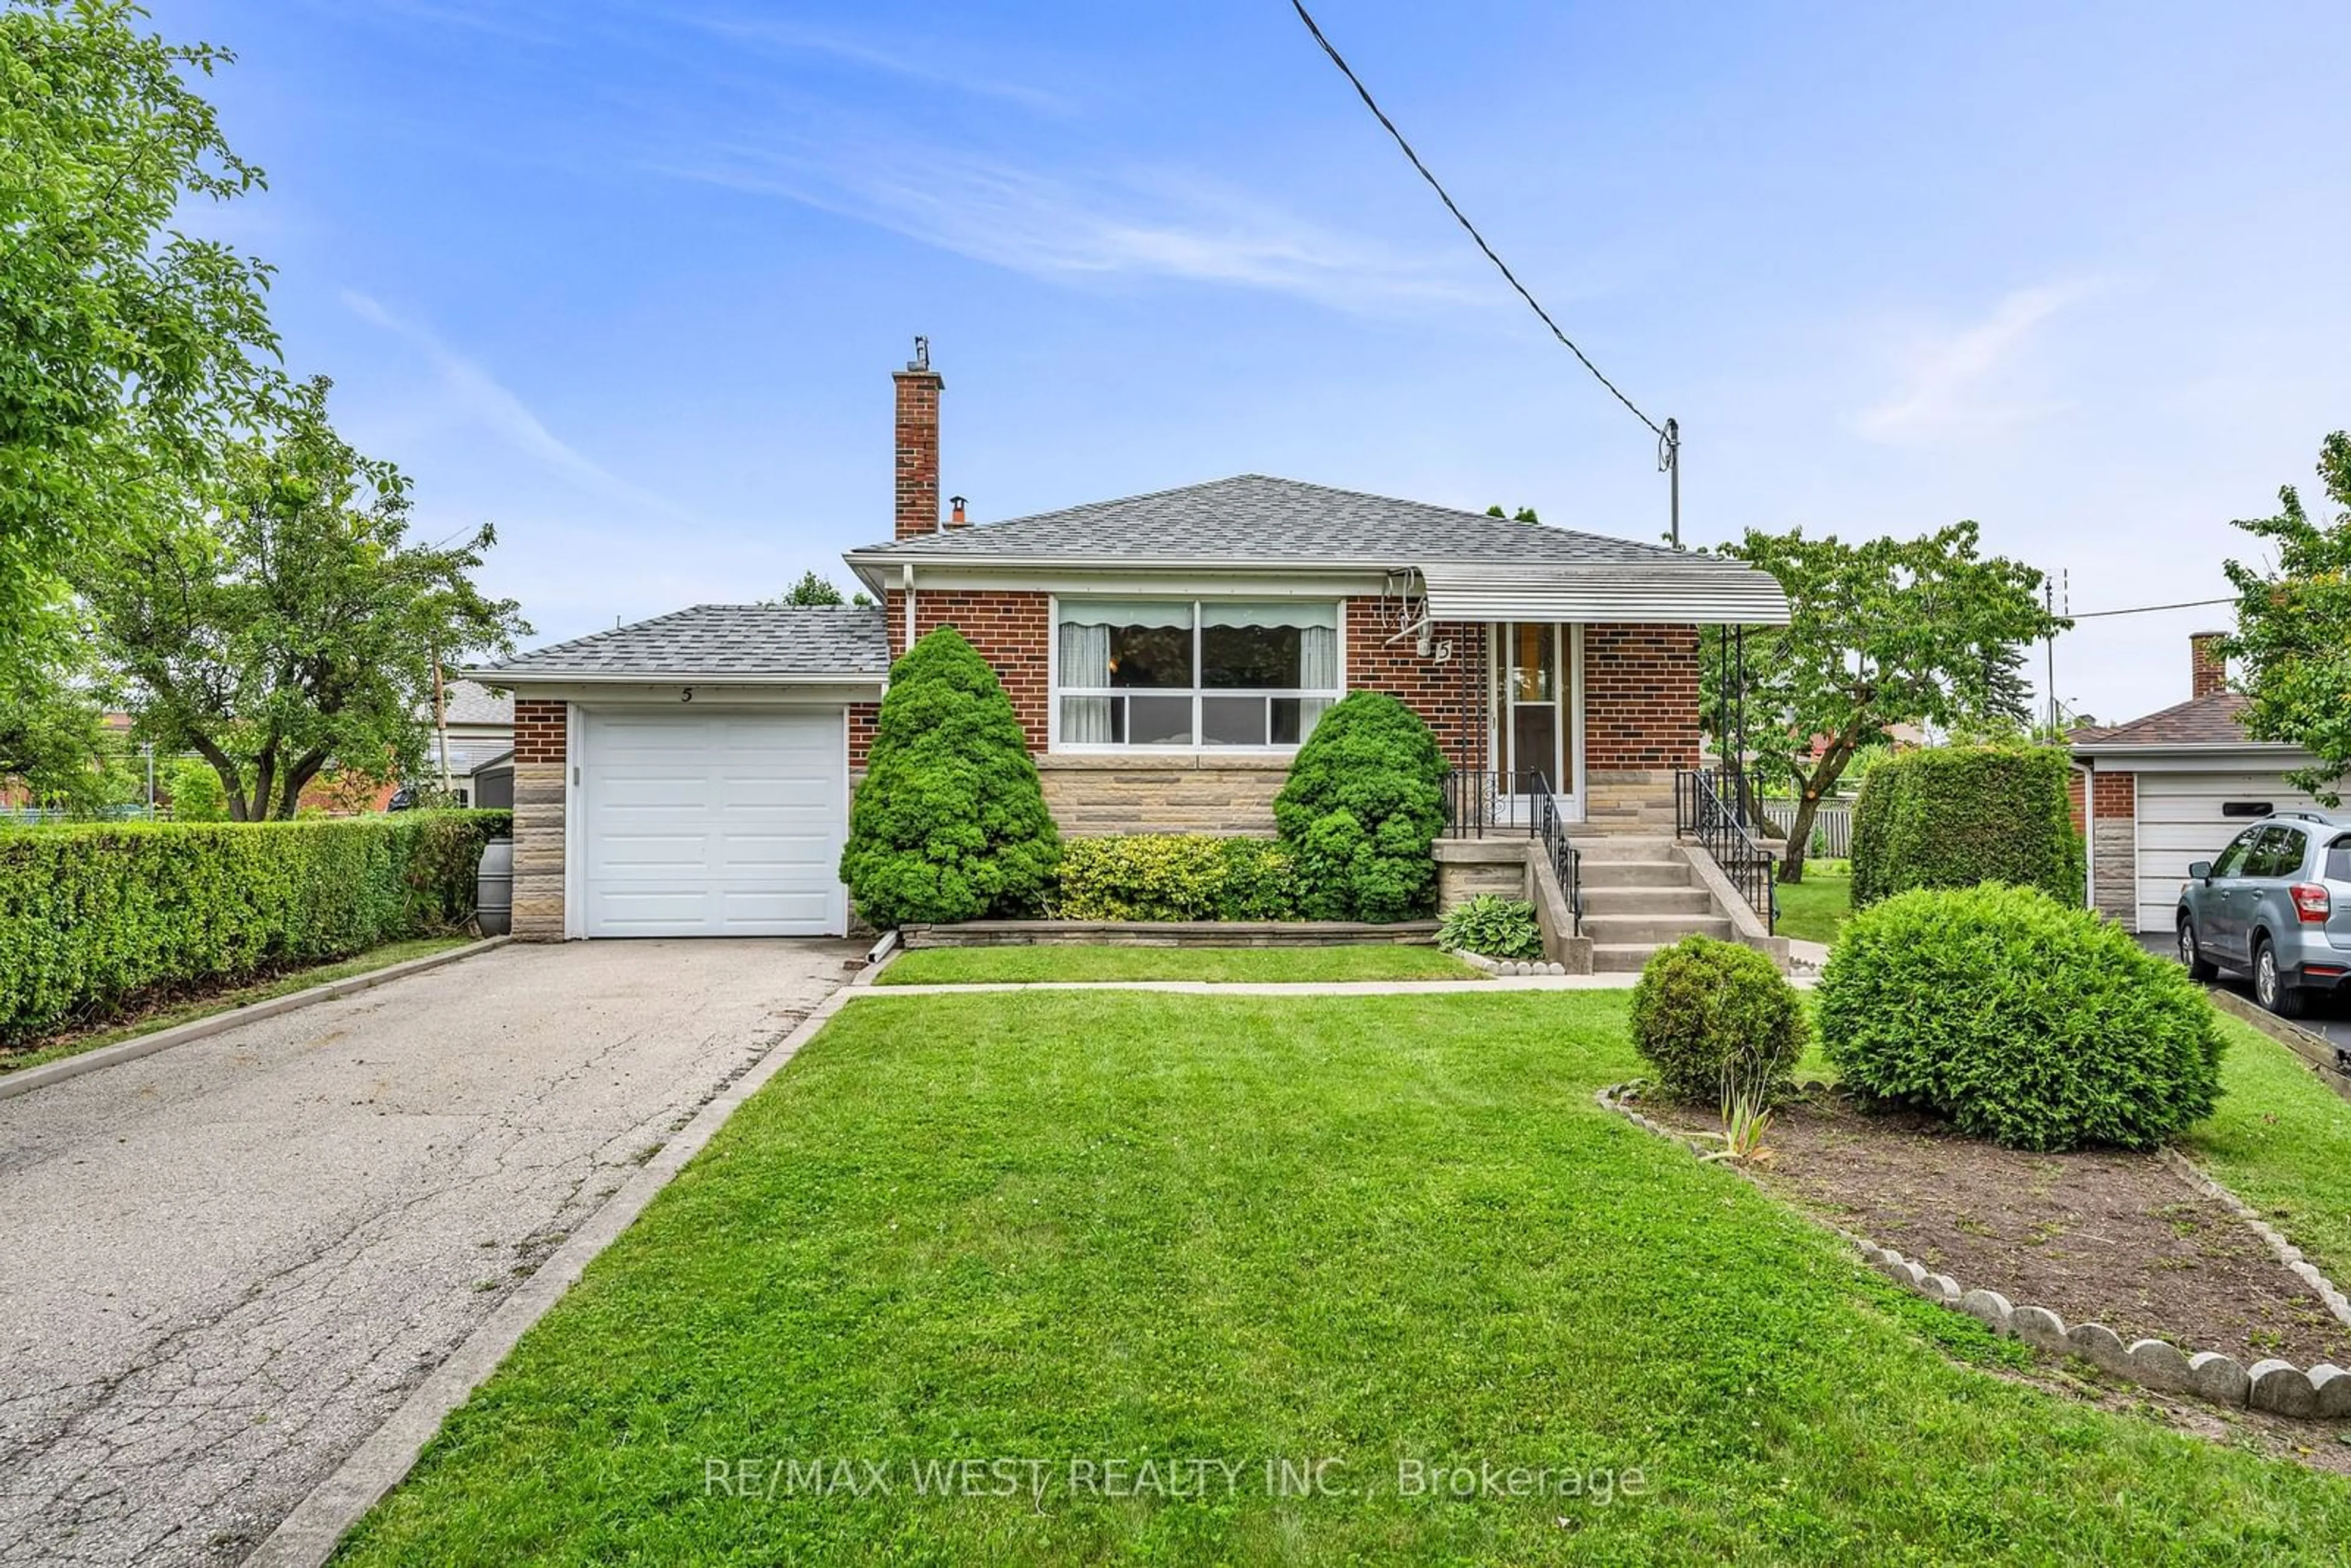 Frontside or backside of a home for 5 Picton Cres, Toronto Ontario M3K 1W4